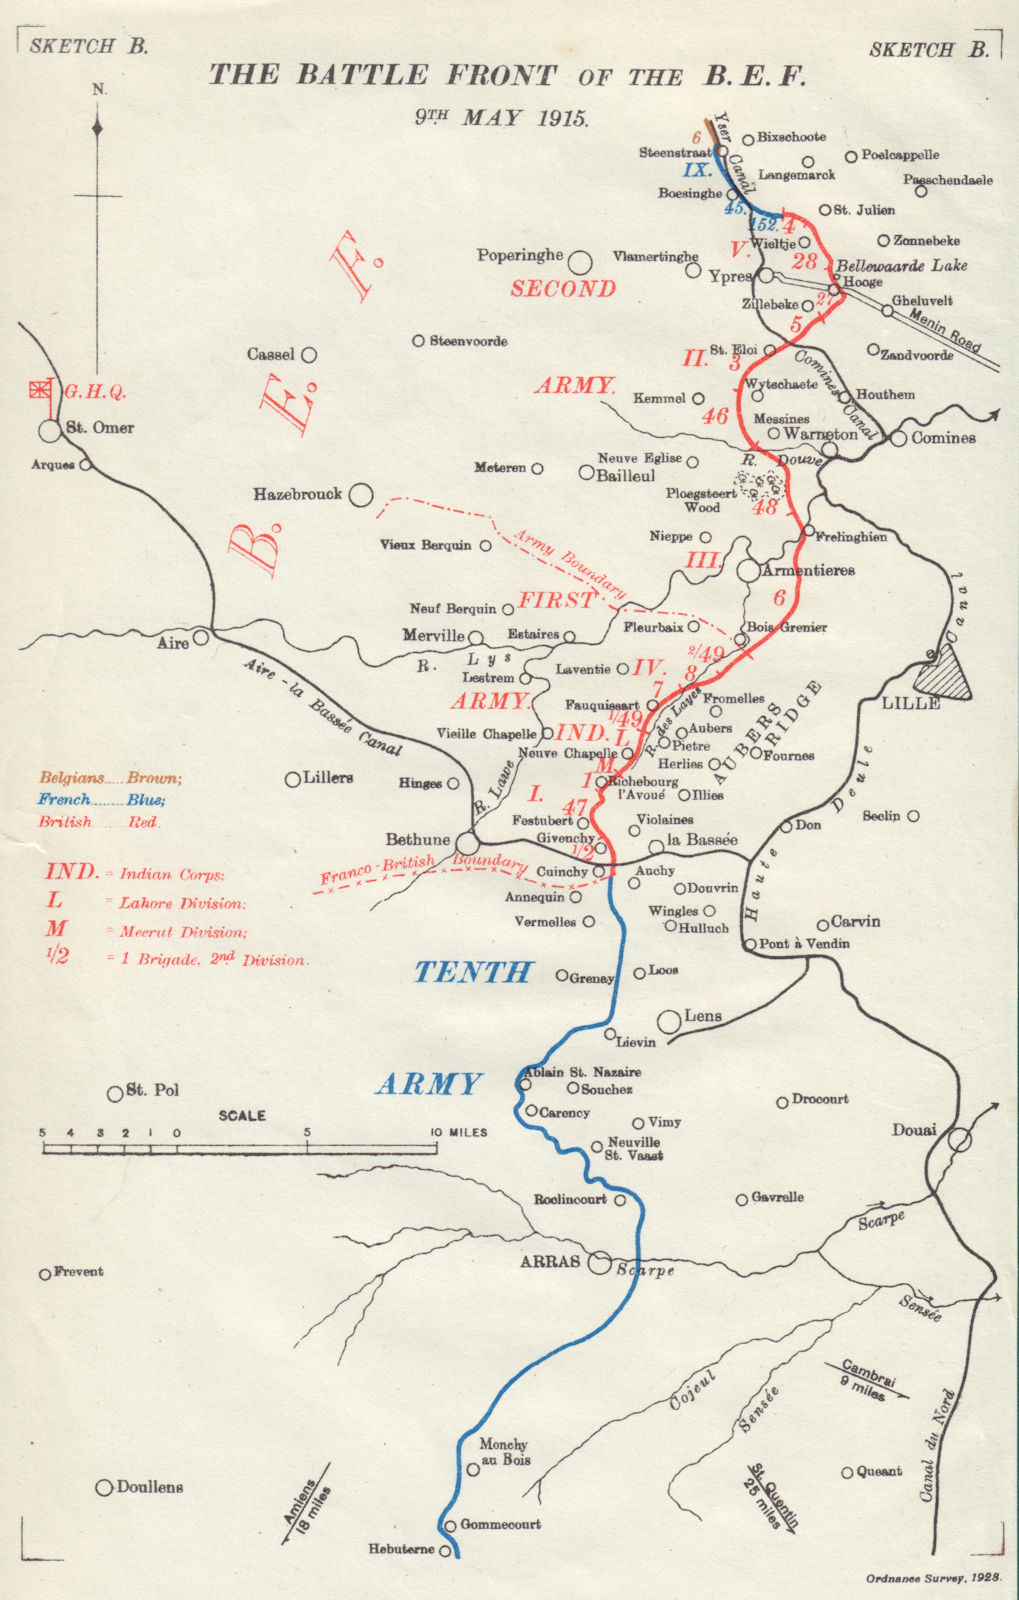 B.E.F. Battle Front 9th May 1915. Battle of Aubers. First World War. 1928 map